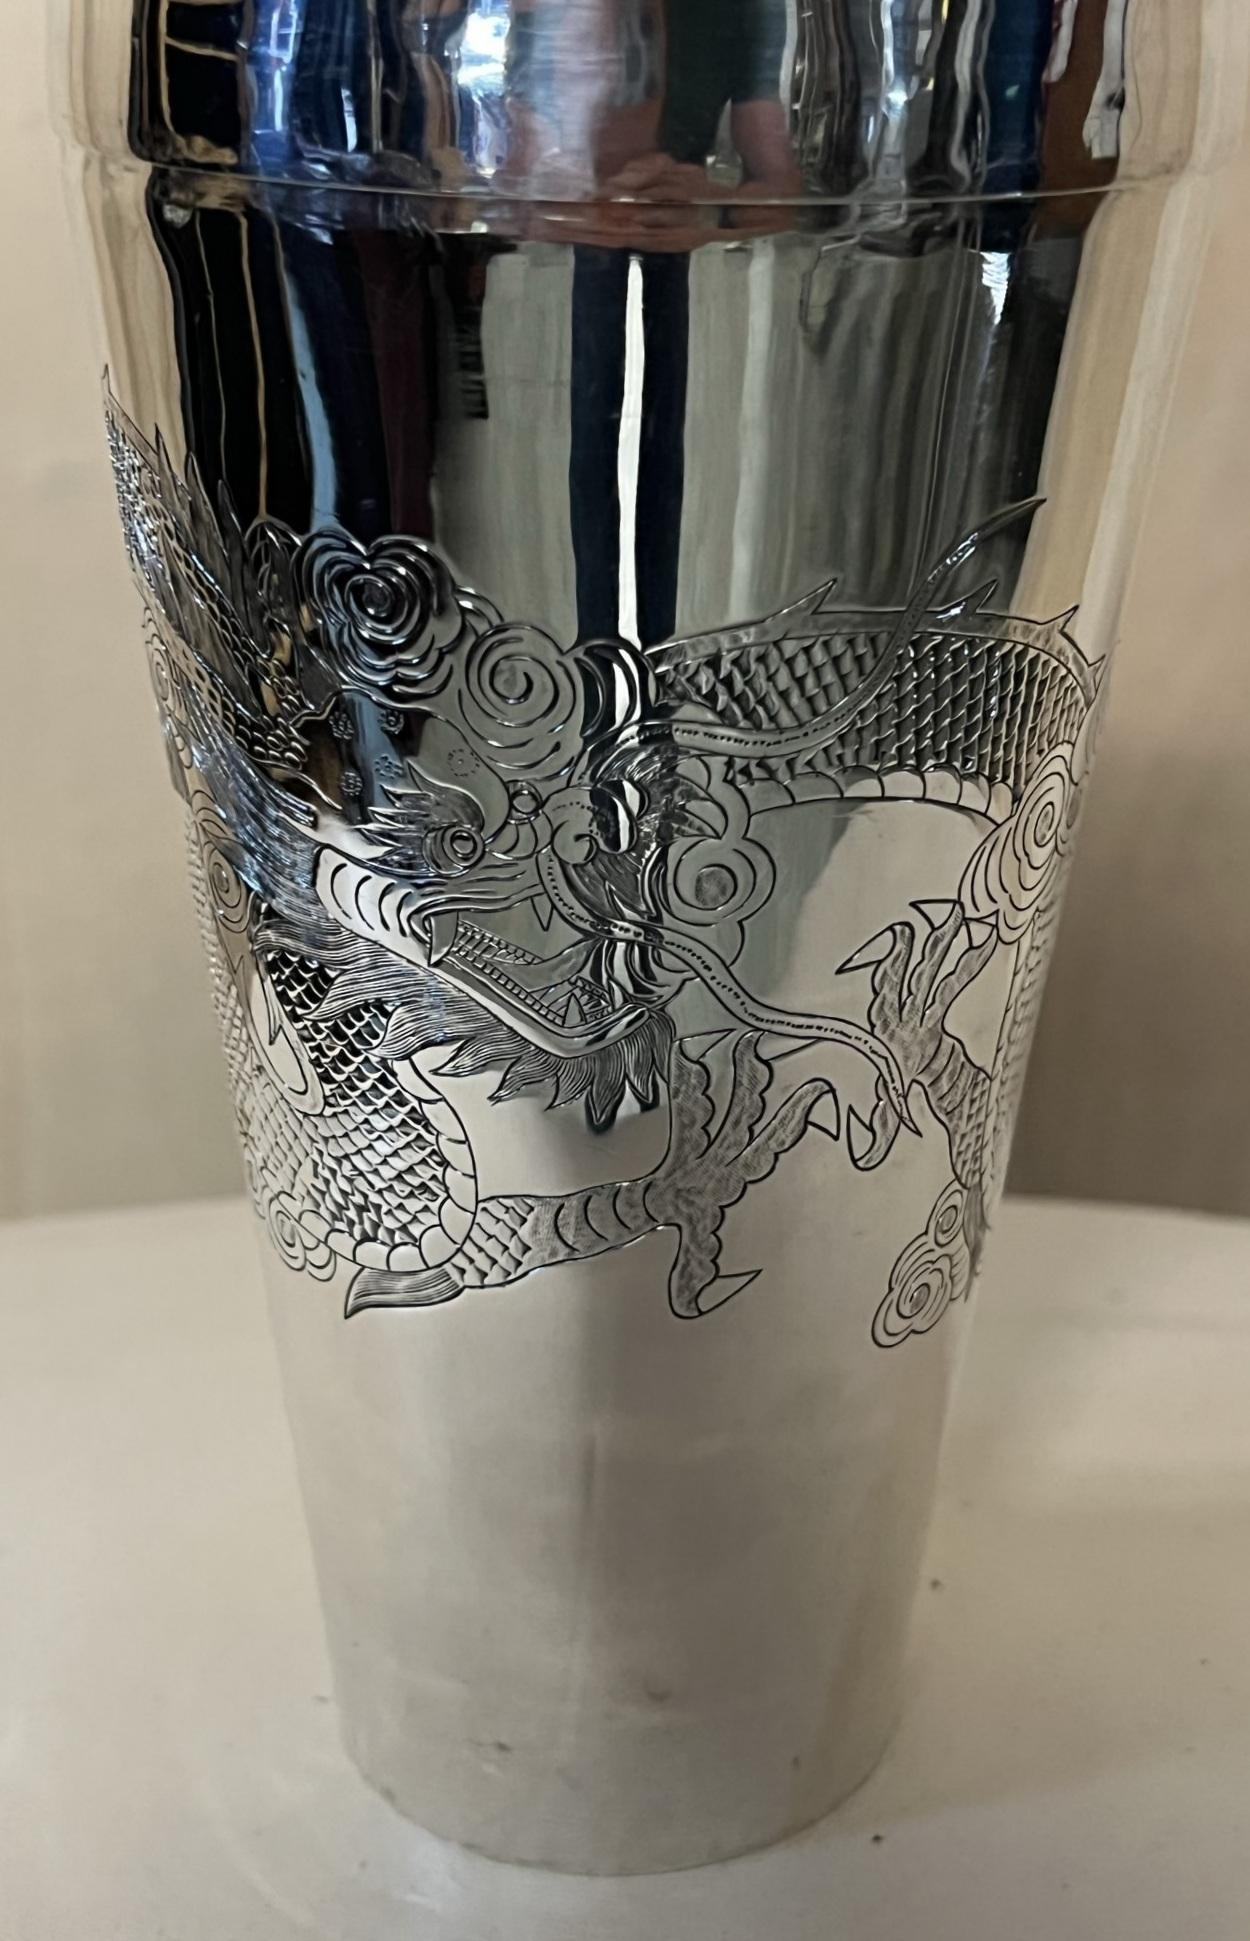 Hand-Crafted STUNNING ANTIQUE CIRA 1900 STERLING SILVER CHiNESE EXPORT DRAGON COCKTAIL SHAKER For Sale